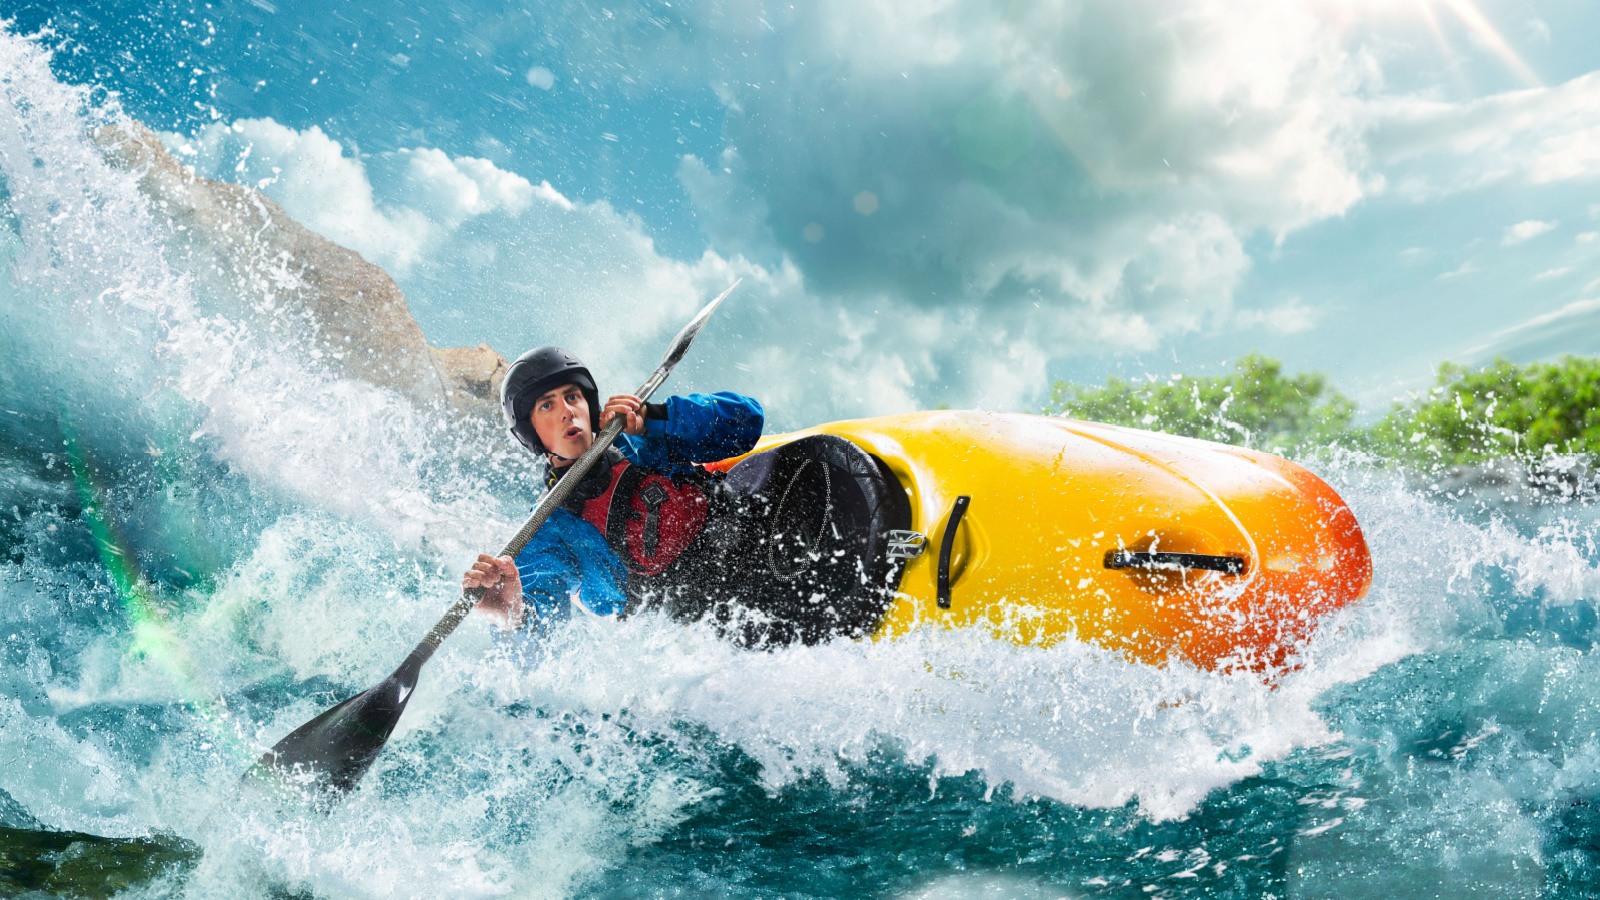 Artur Didyk/Shutterstock<p>For couples who thrive on adrenaline, an adventure-packed weekend is the perfect way to reconnect. Whether it's white-water rafting, zip-lining, or rock climbing, the thrill of overcoming challenges together strengthens bonds. The shared excitement and sense of accomplishment ignite a spark that's hard to replicate.</p>